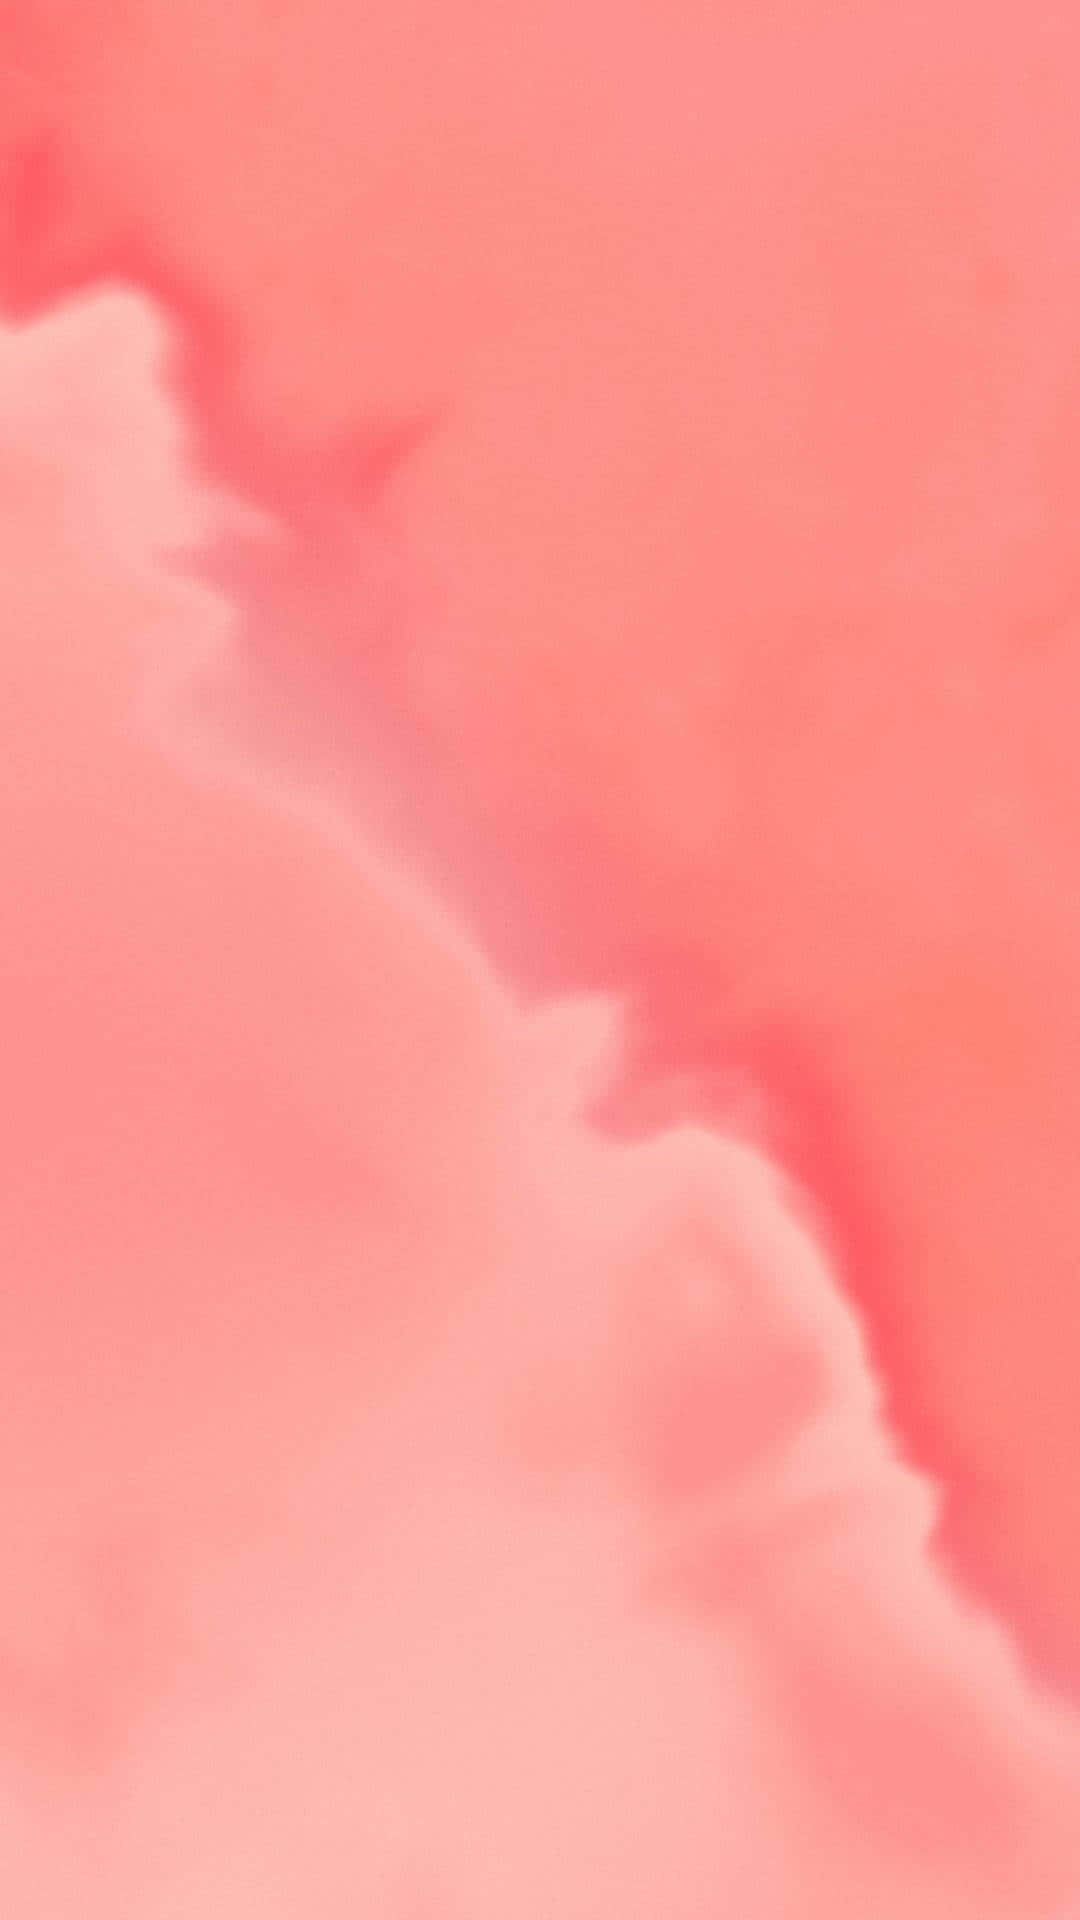 Embrace the sublime serenity of the pastel red aesthetic background